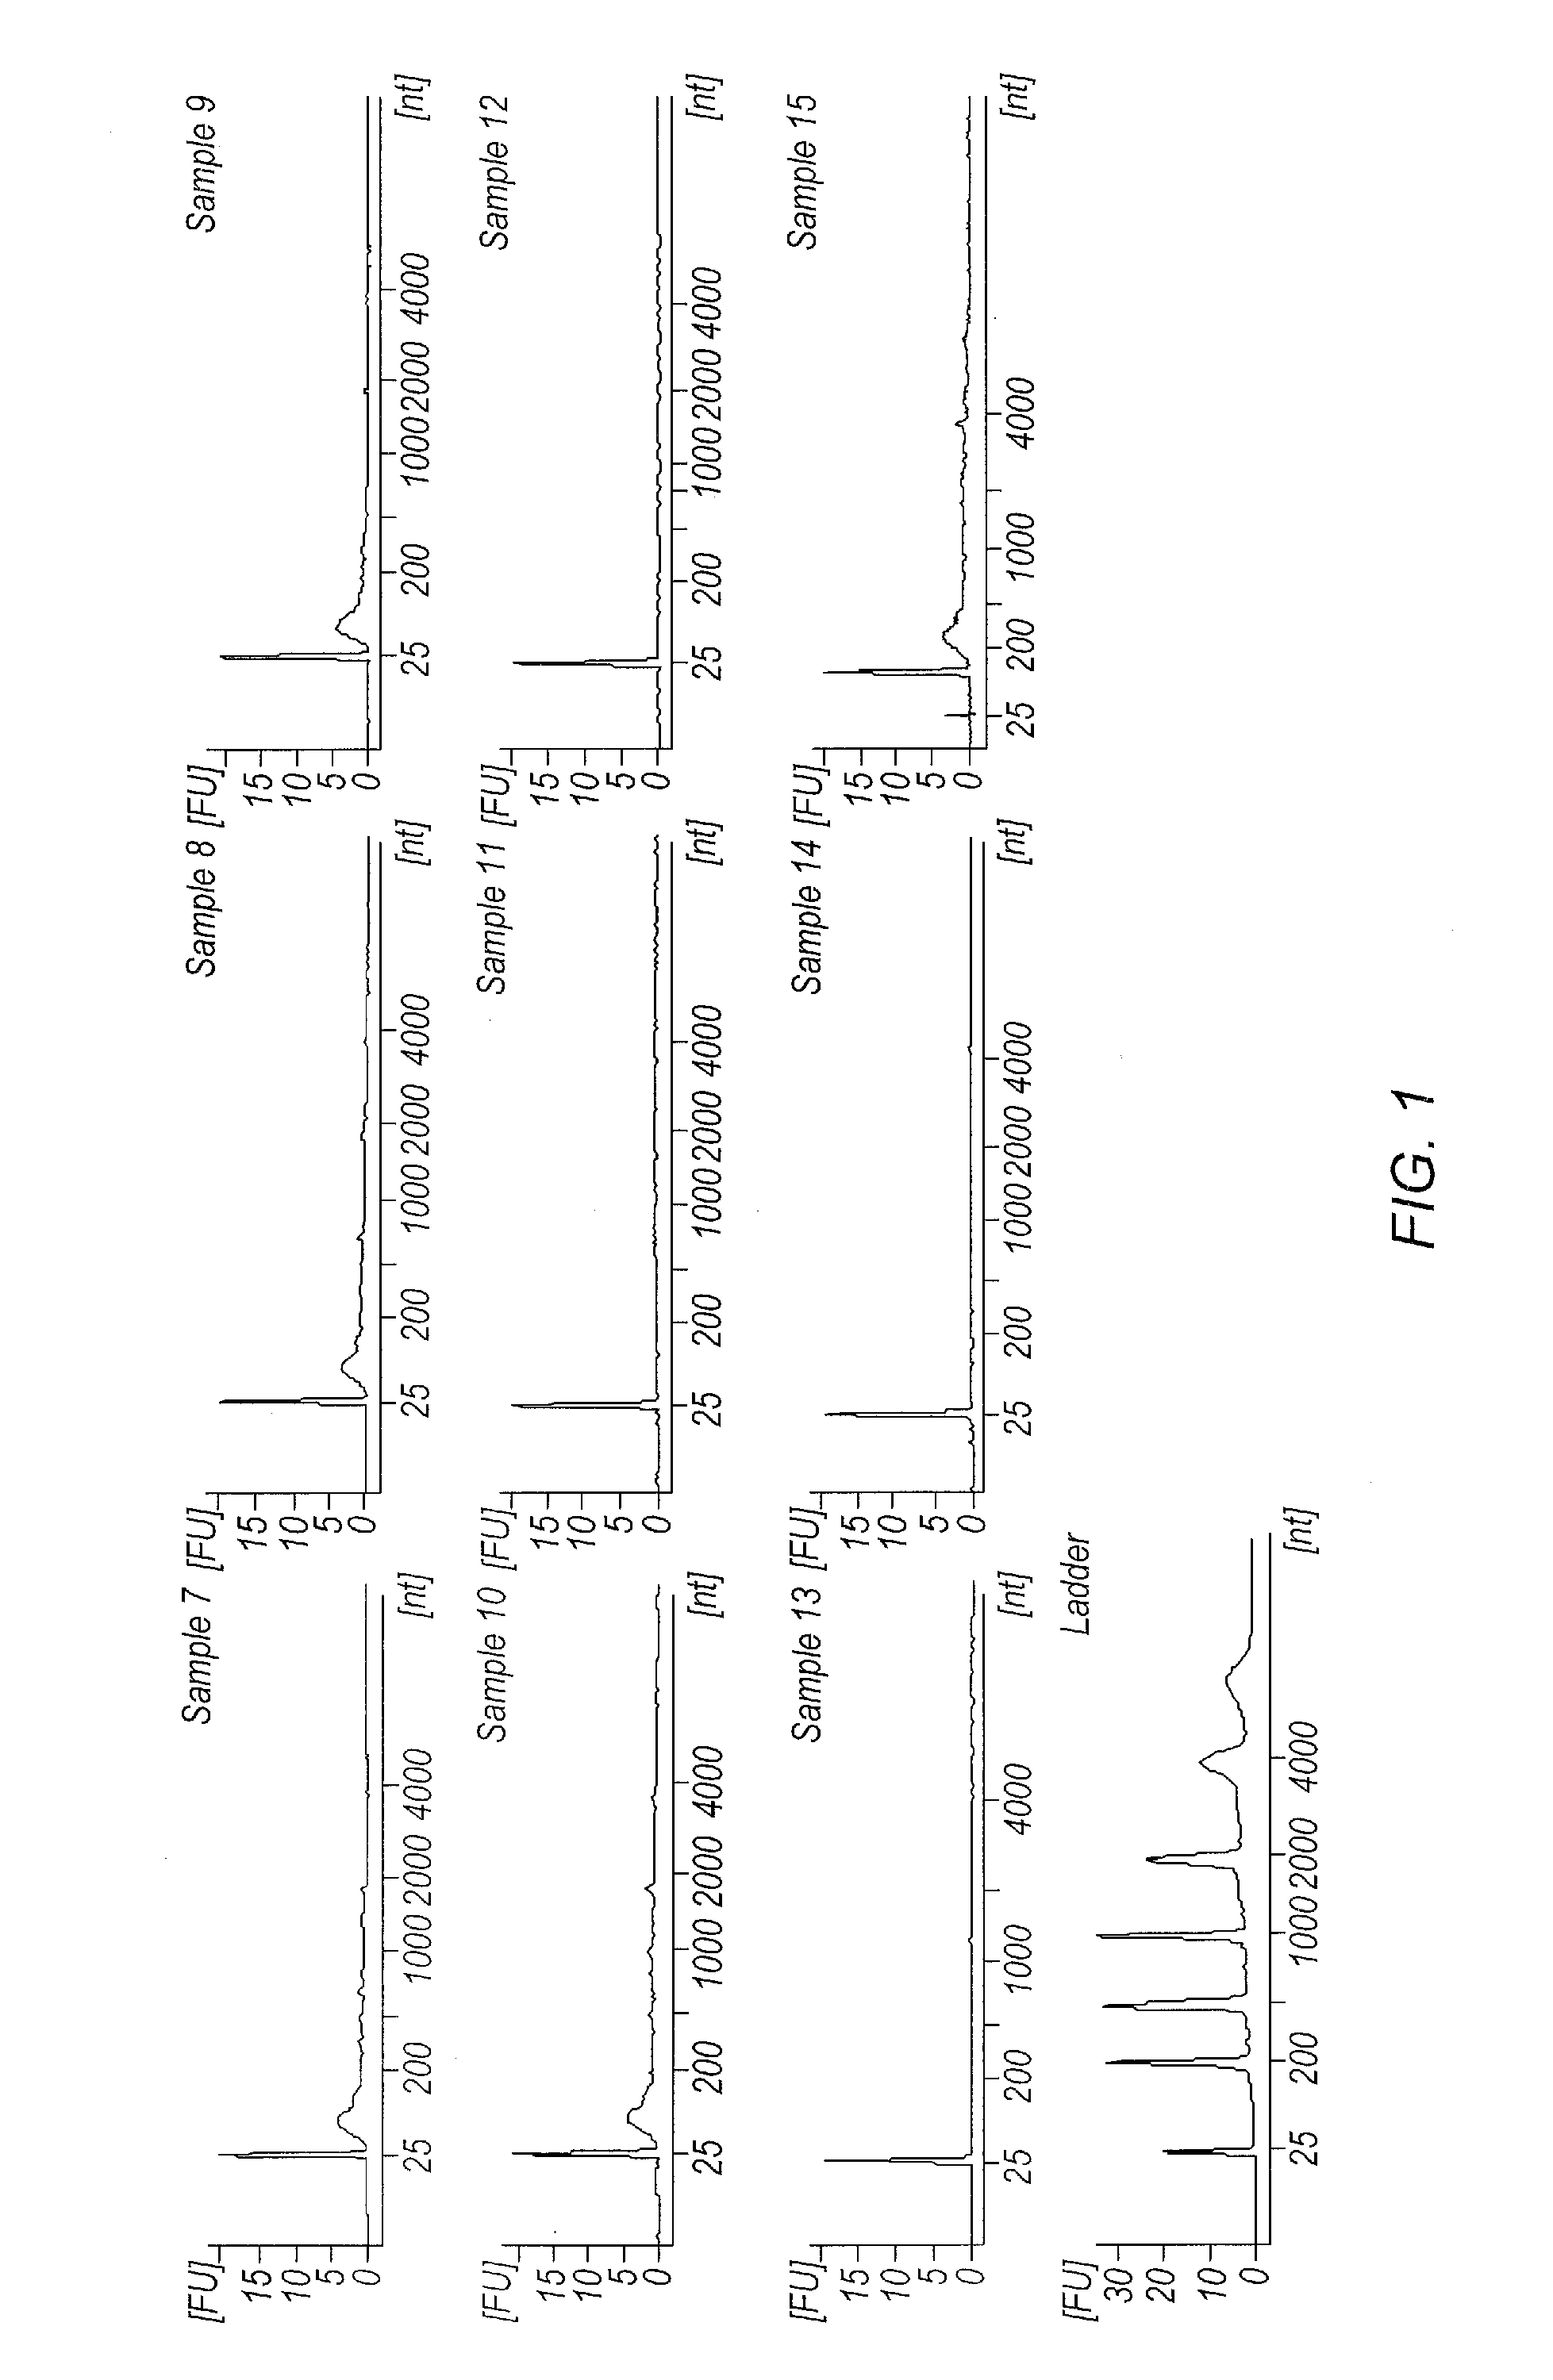 Methods for fractionating and processing microparticles from biological samples and using them for biomarker discovery